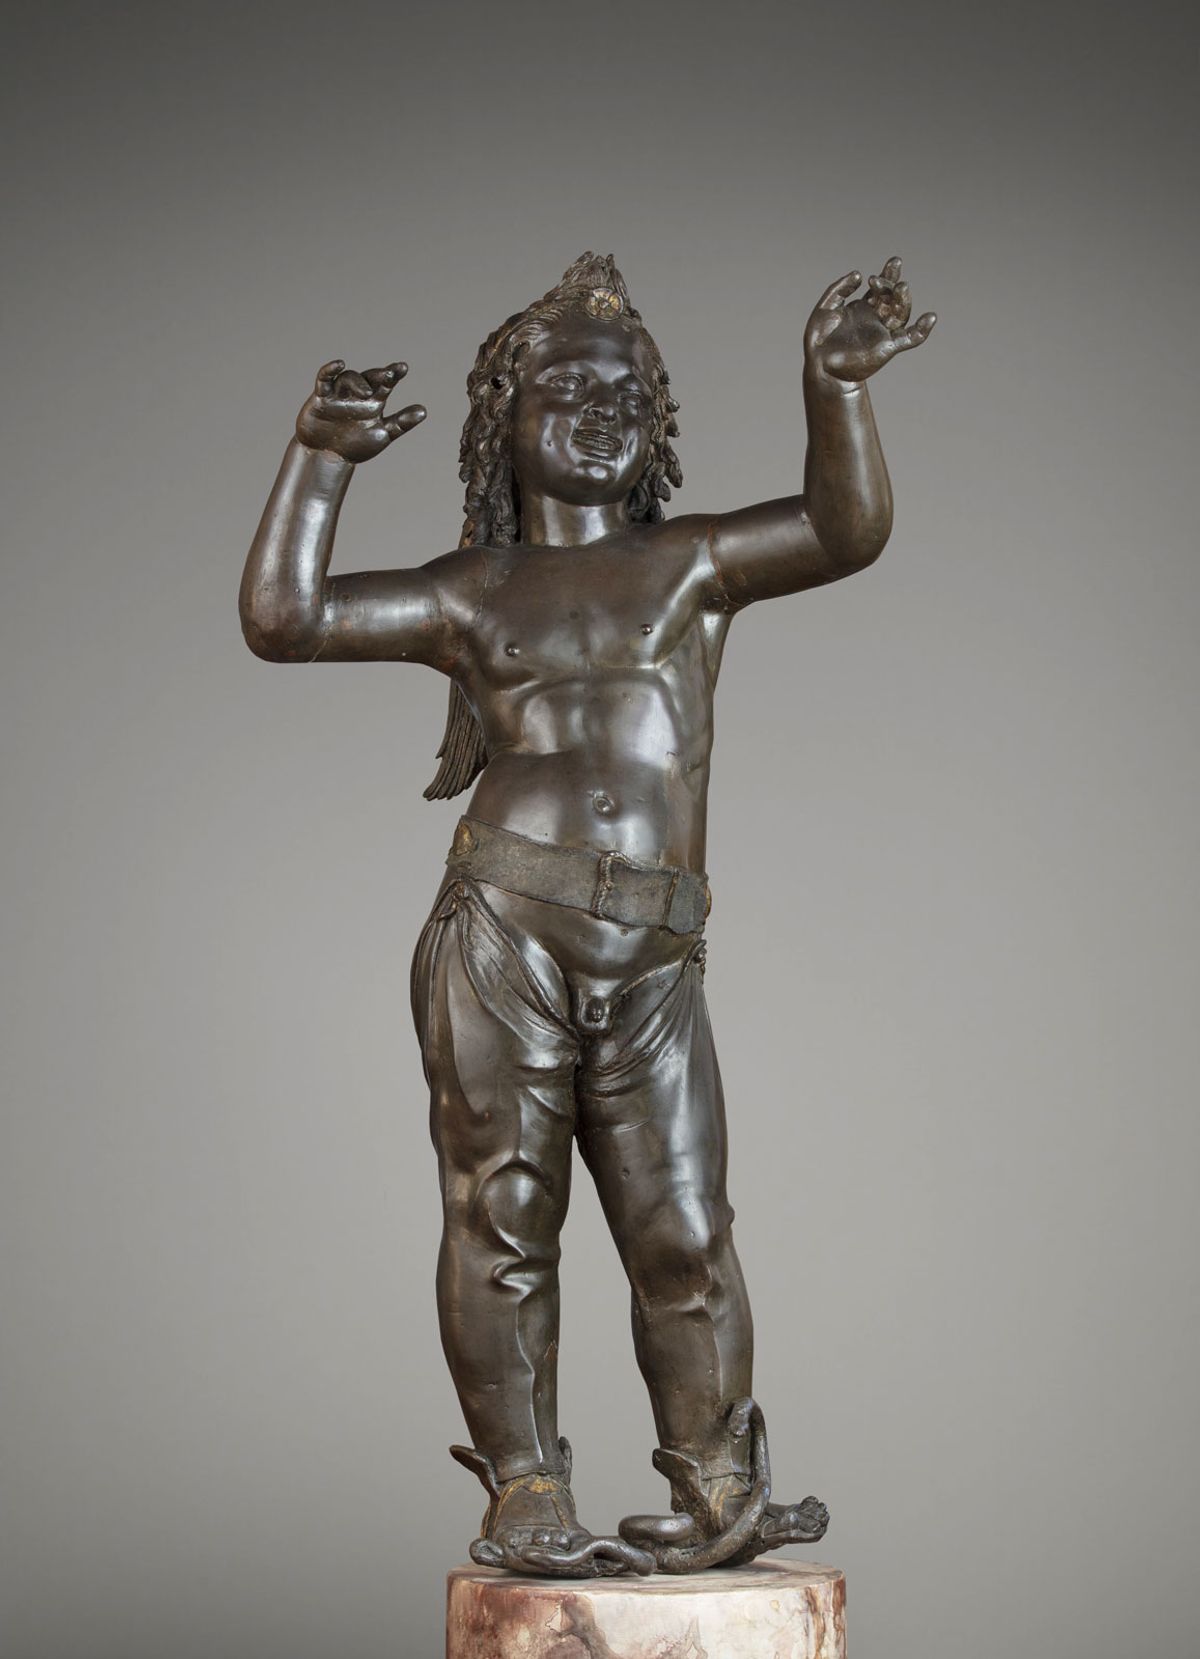 Donatello's bronze sculpture Attis-Amorino will be one of the highlights of the Victoria and Albert Museum's exhibition Museo Nazionale del Bargello, Florence, courtesy of the Ministry of Culture. Photo: Bruno Bruchi